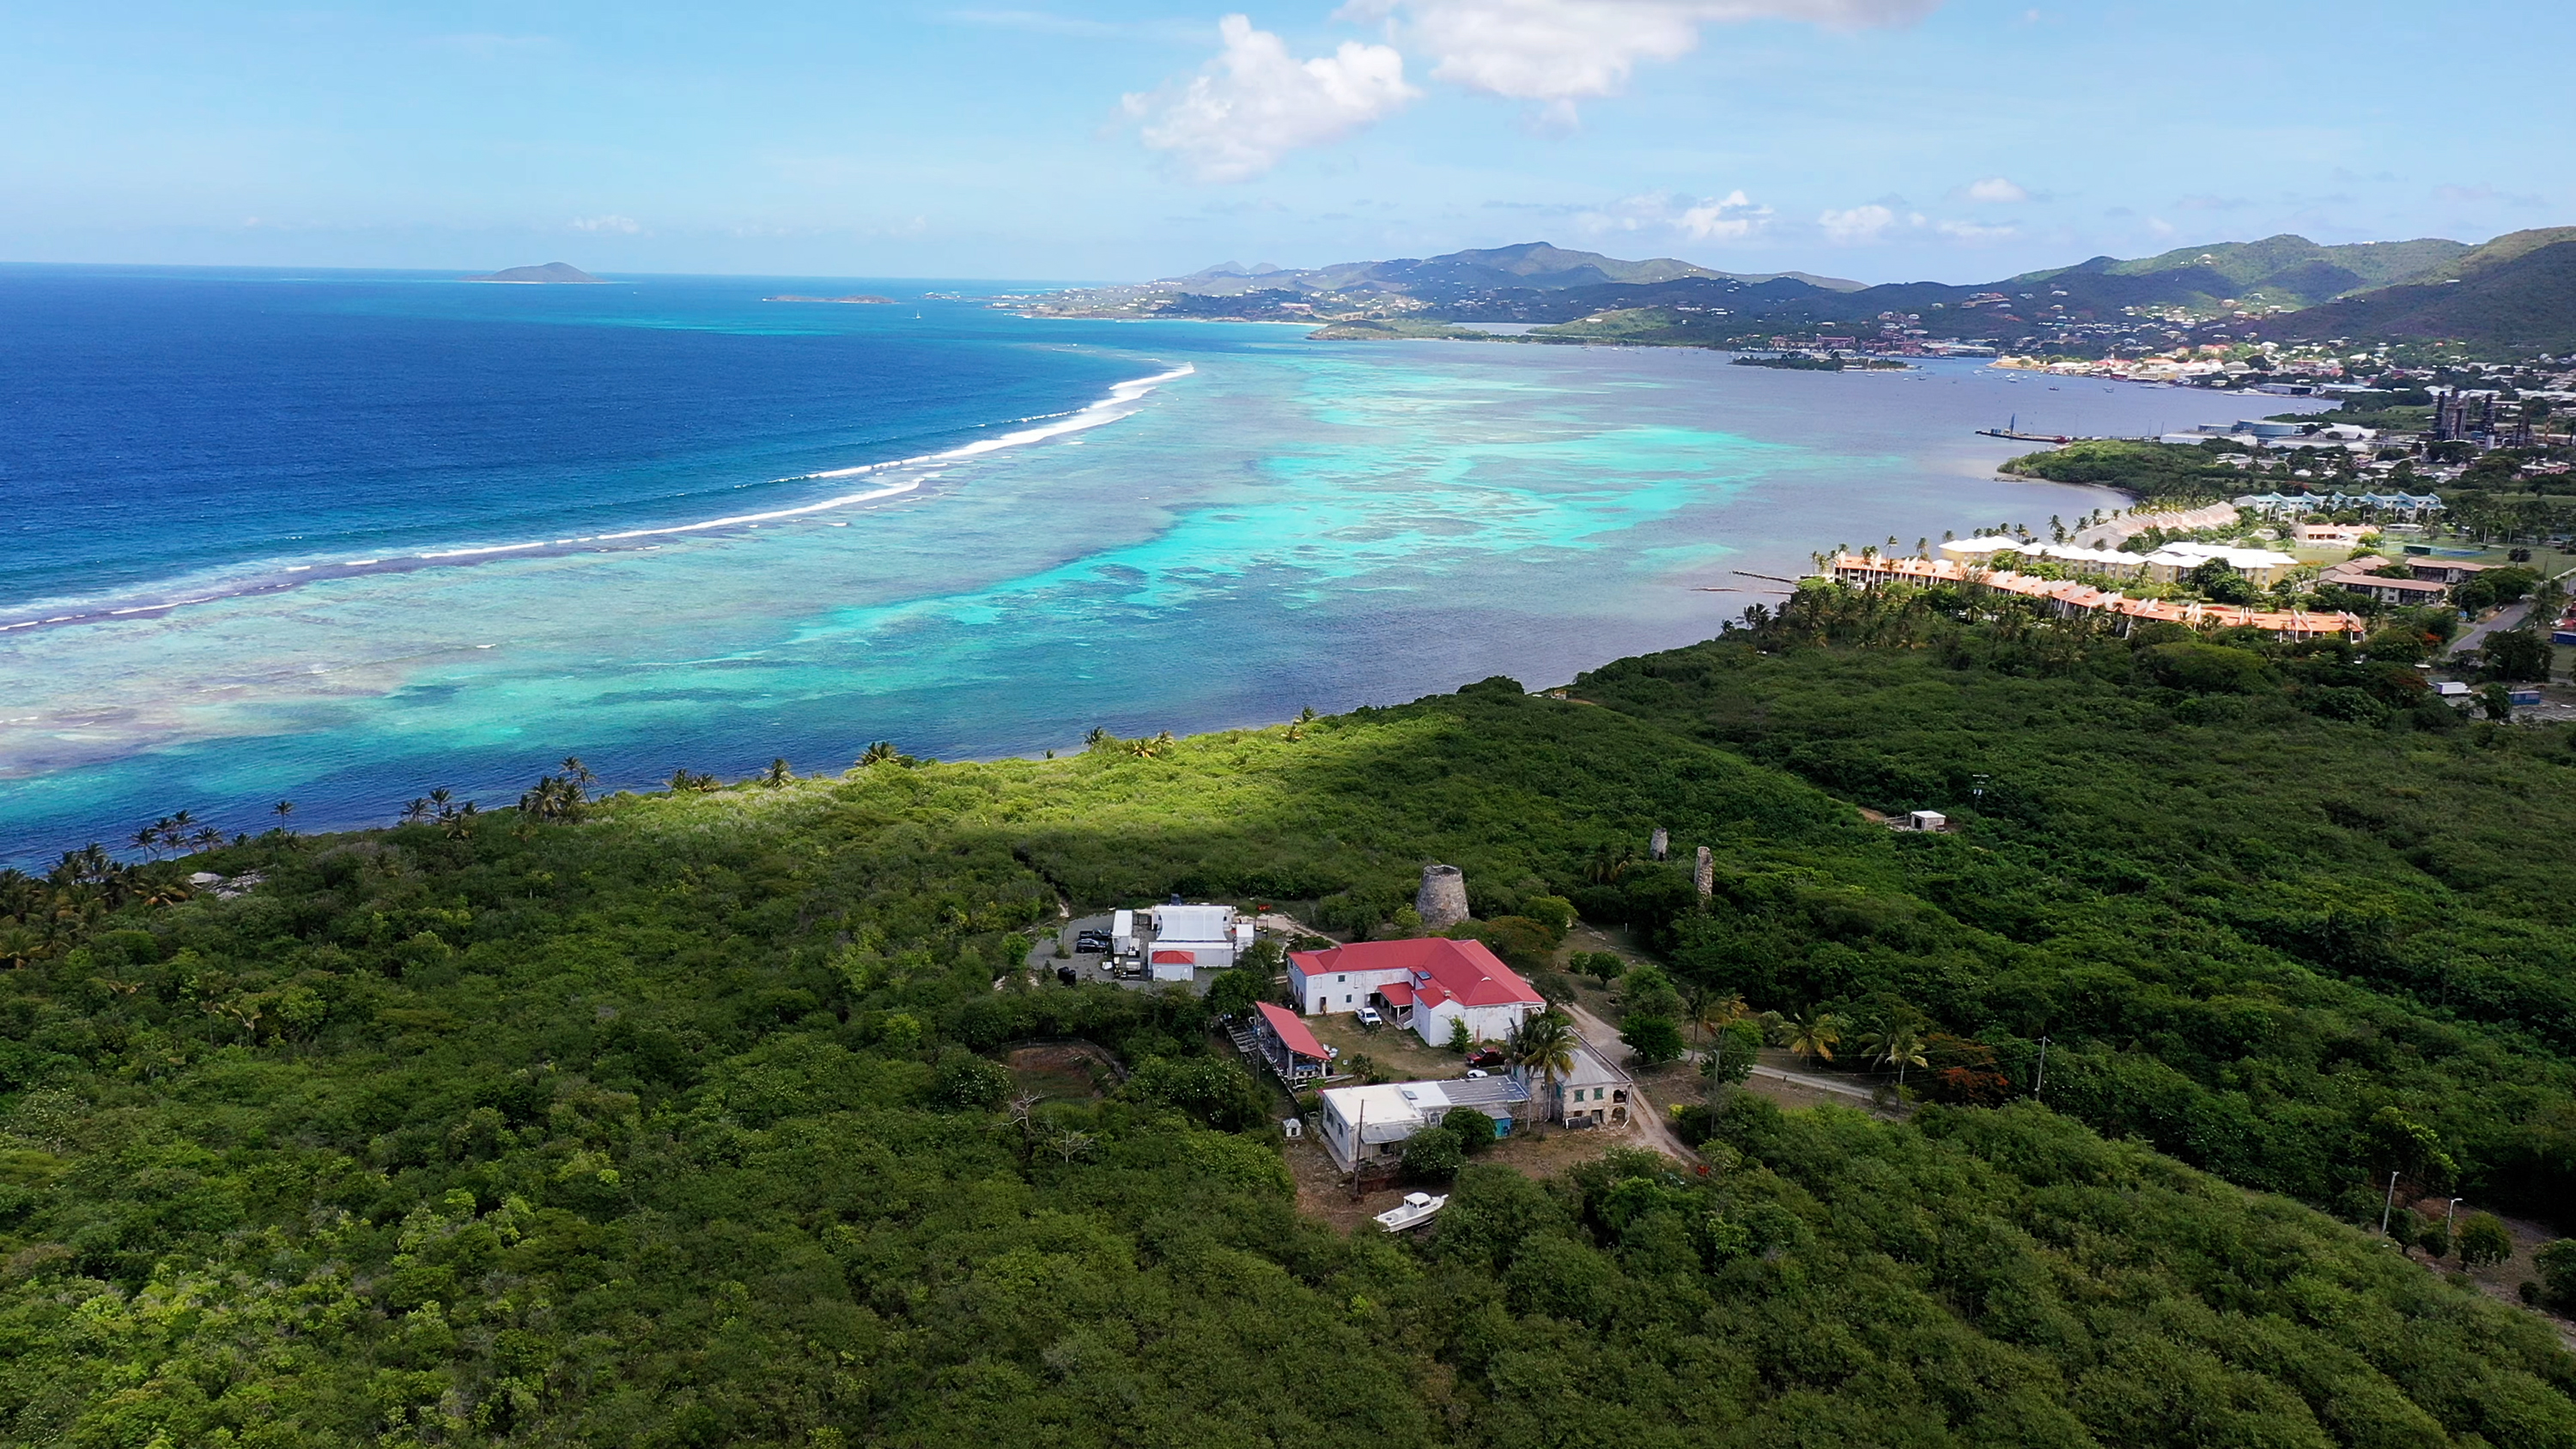 Aerial view of TNC's Coral Innovation Hub on St. Croix, U.S. Virgin Islands, surrounded by green vegetation with blue ocean on the horizon